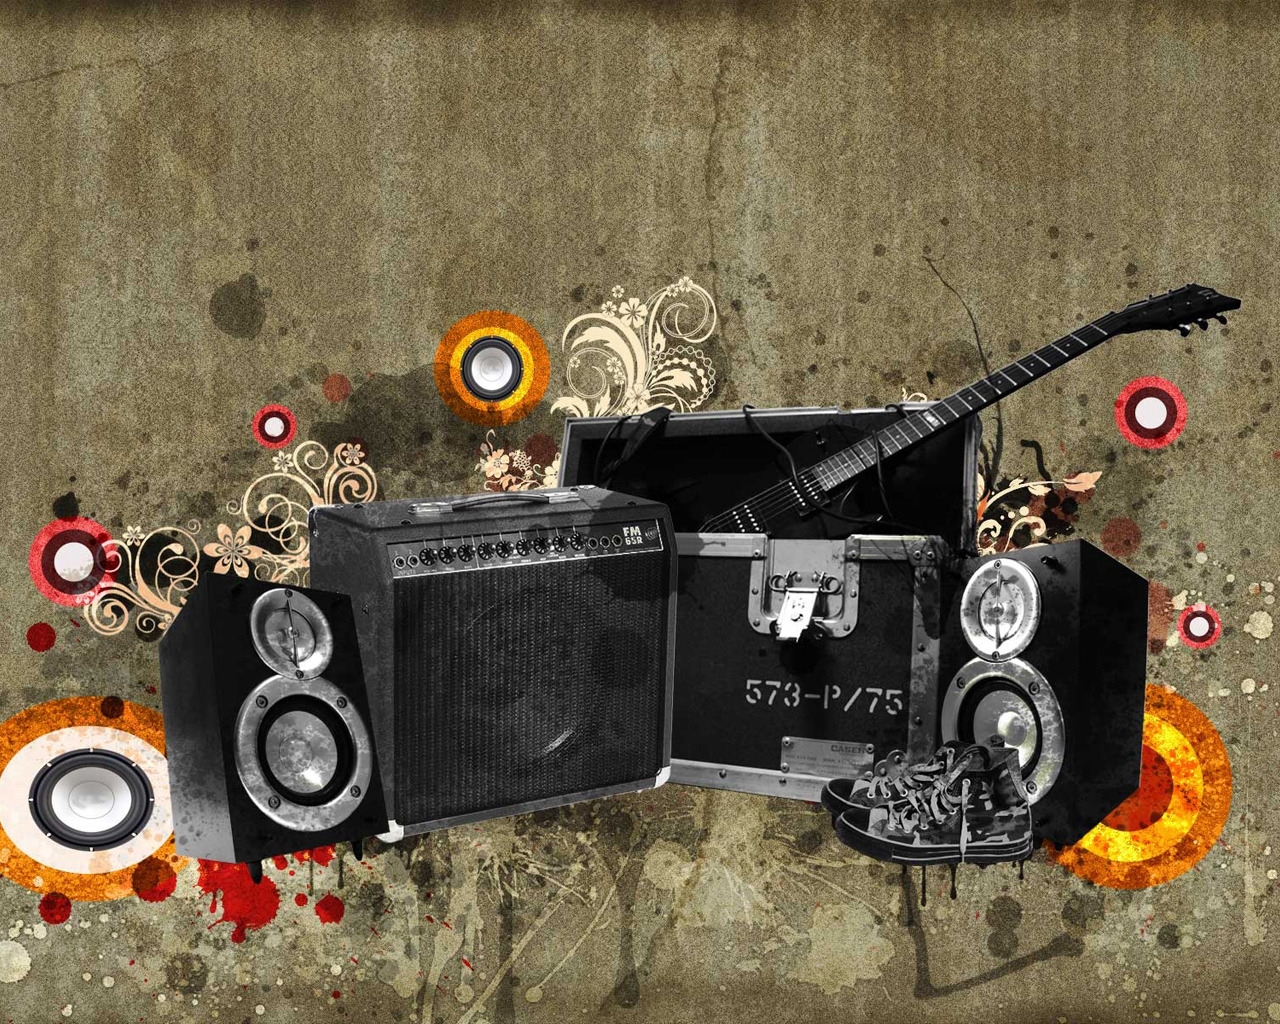 Vintage Speakers And Guitar for 1280 x 1024 resolution